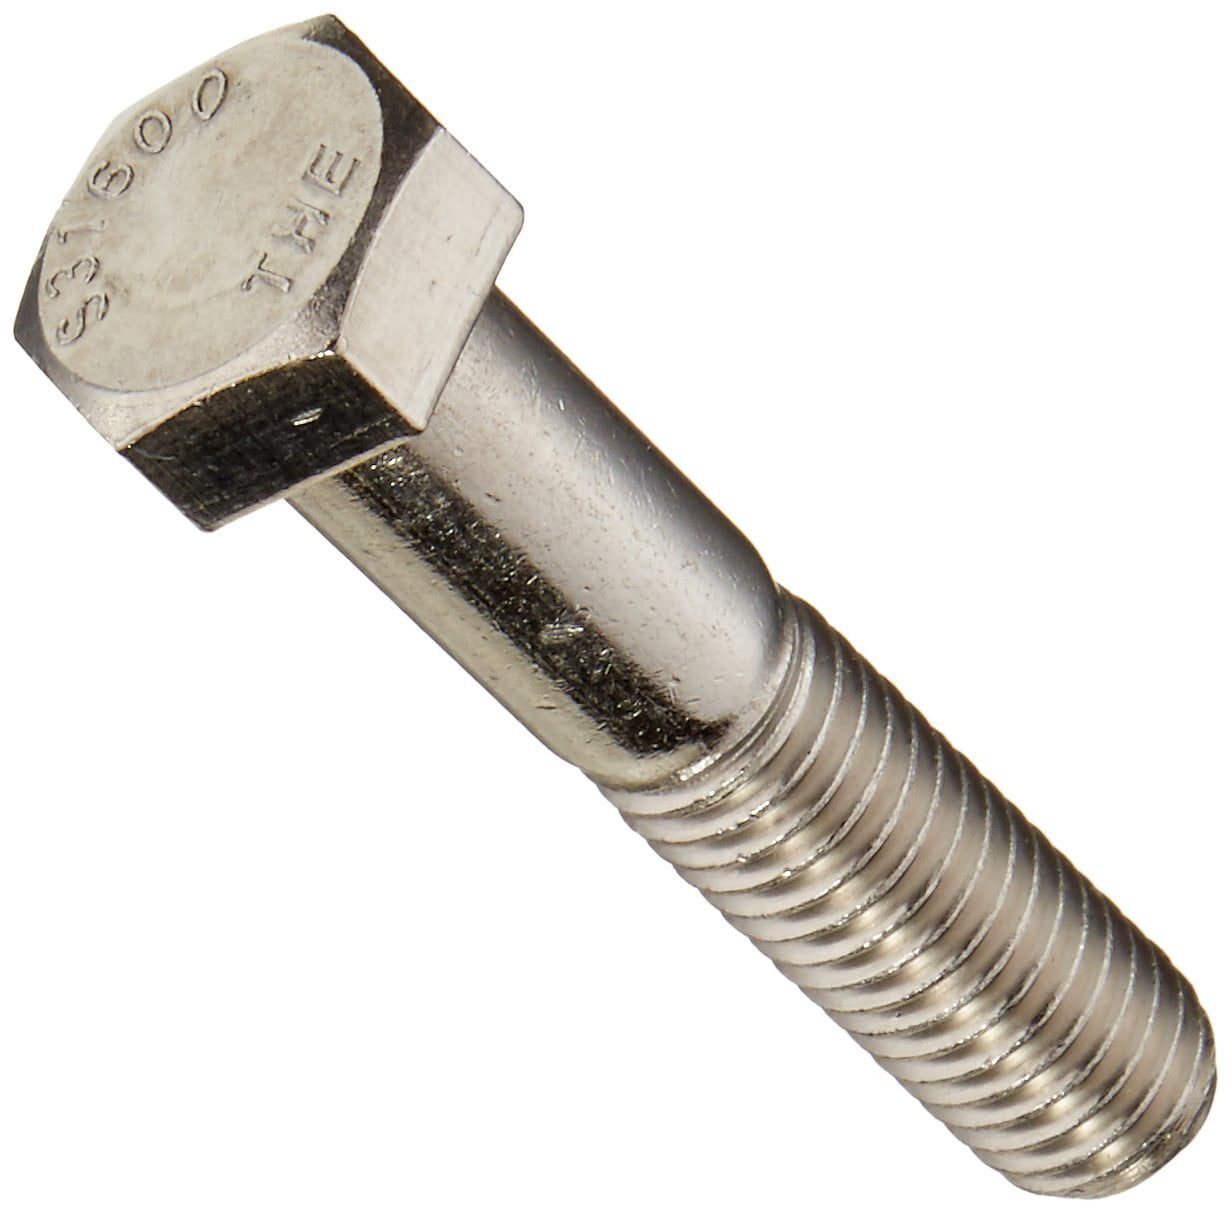 7/16-14 Hex Bolts Stainless Steel Cap Screws Partially Threaded All Sizes Listed